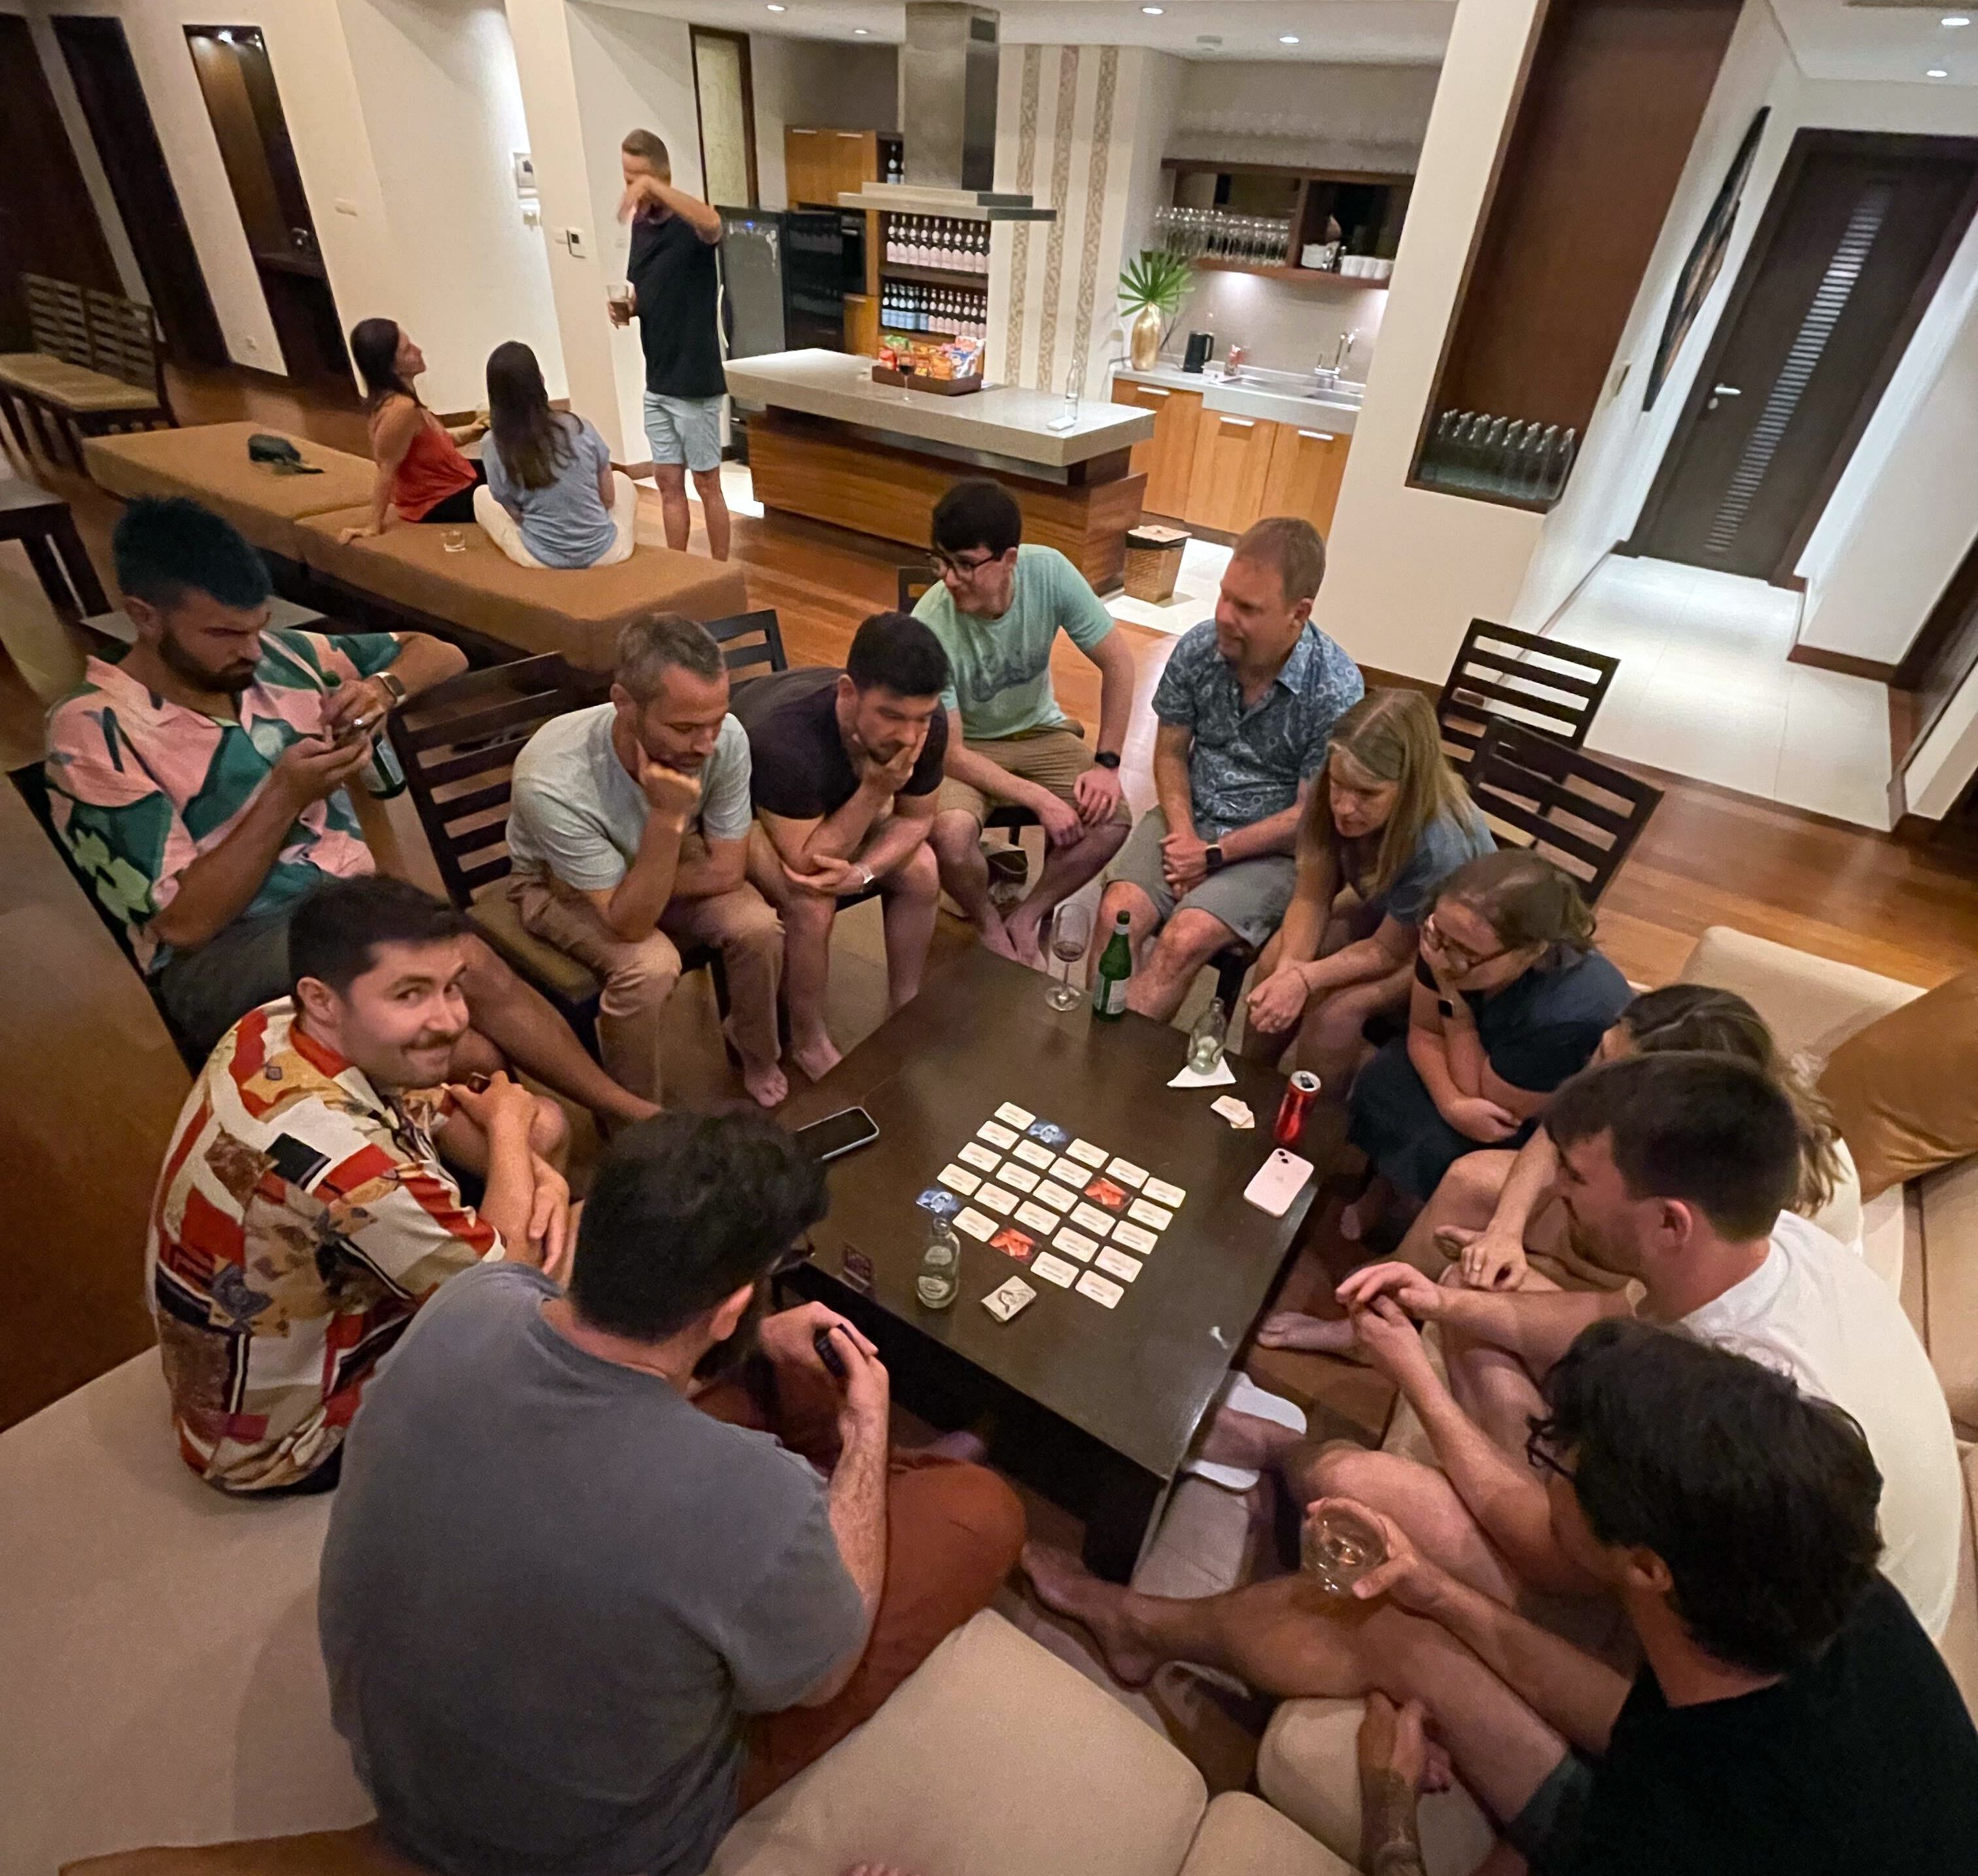 A photo of a large group of people playing an intense card game